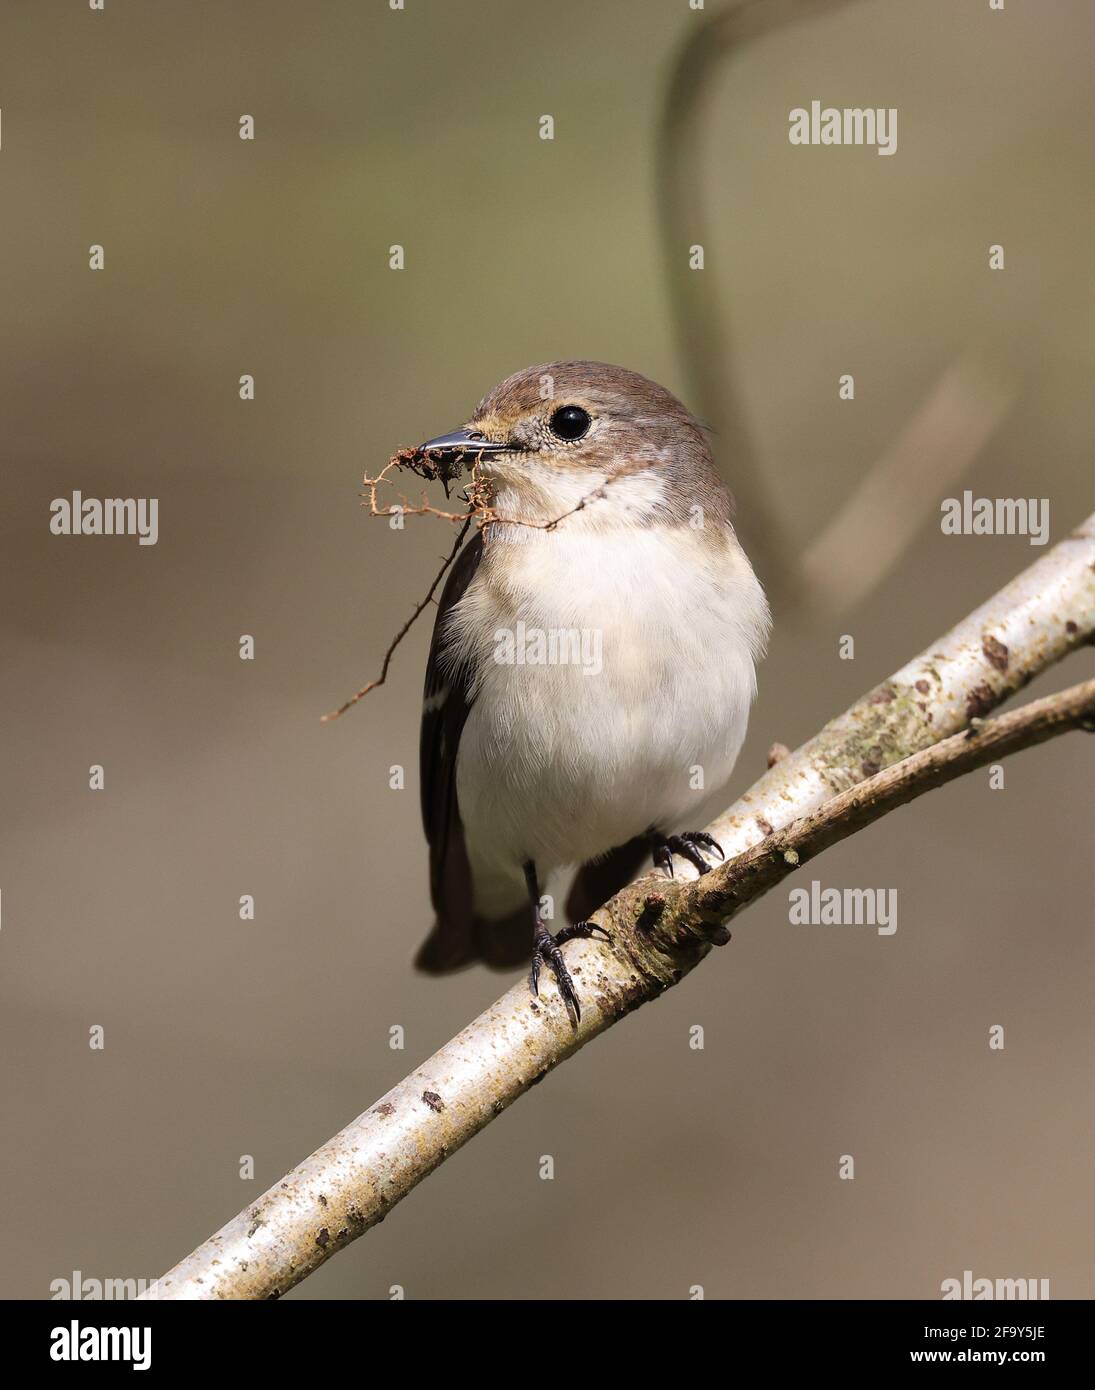 Pied Flycatcher, Ficedula hypoleuca, perched with nesting material in Mid Wales, U.K. April 2021 Stock Photo